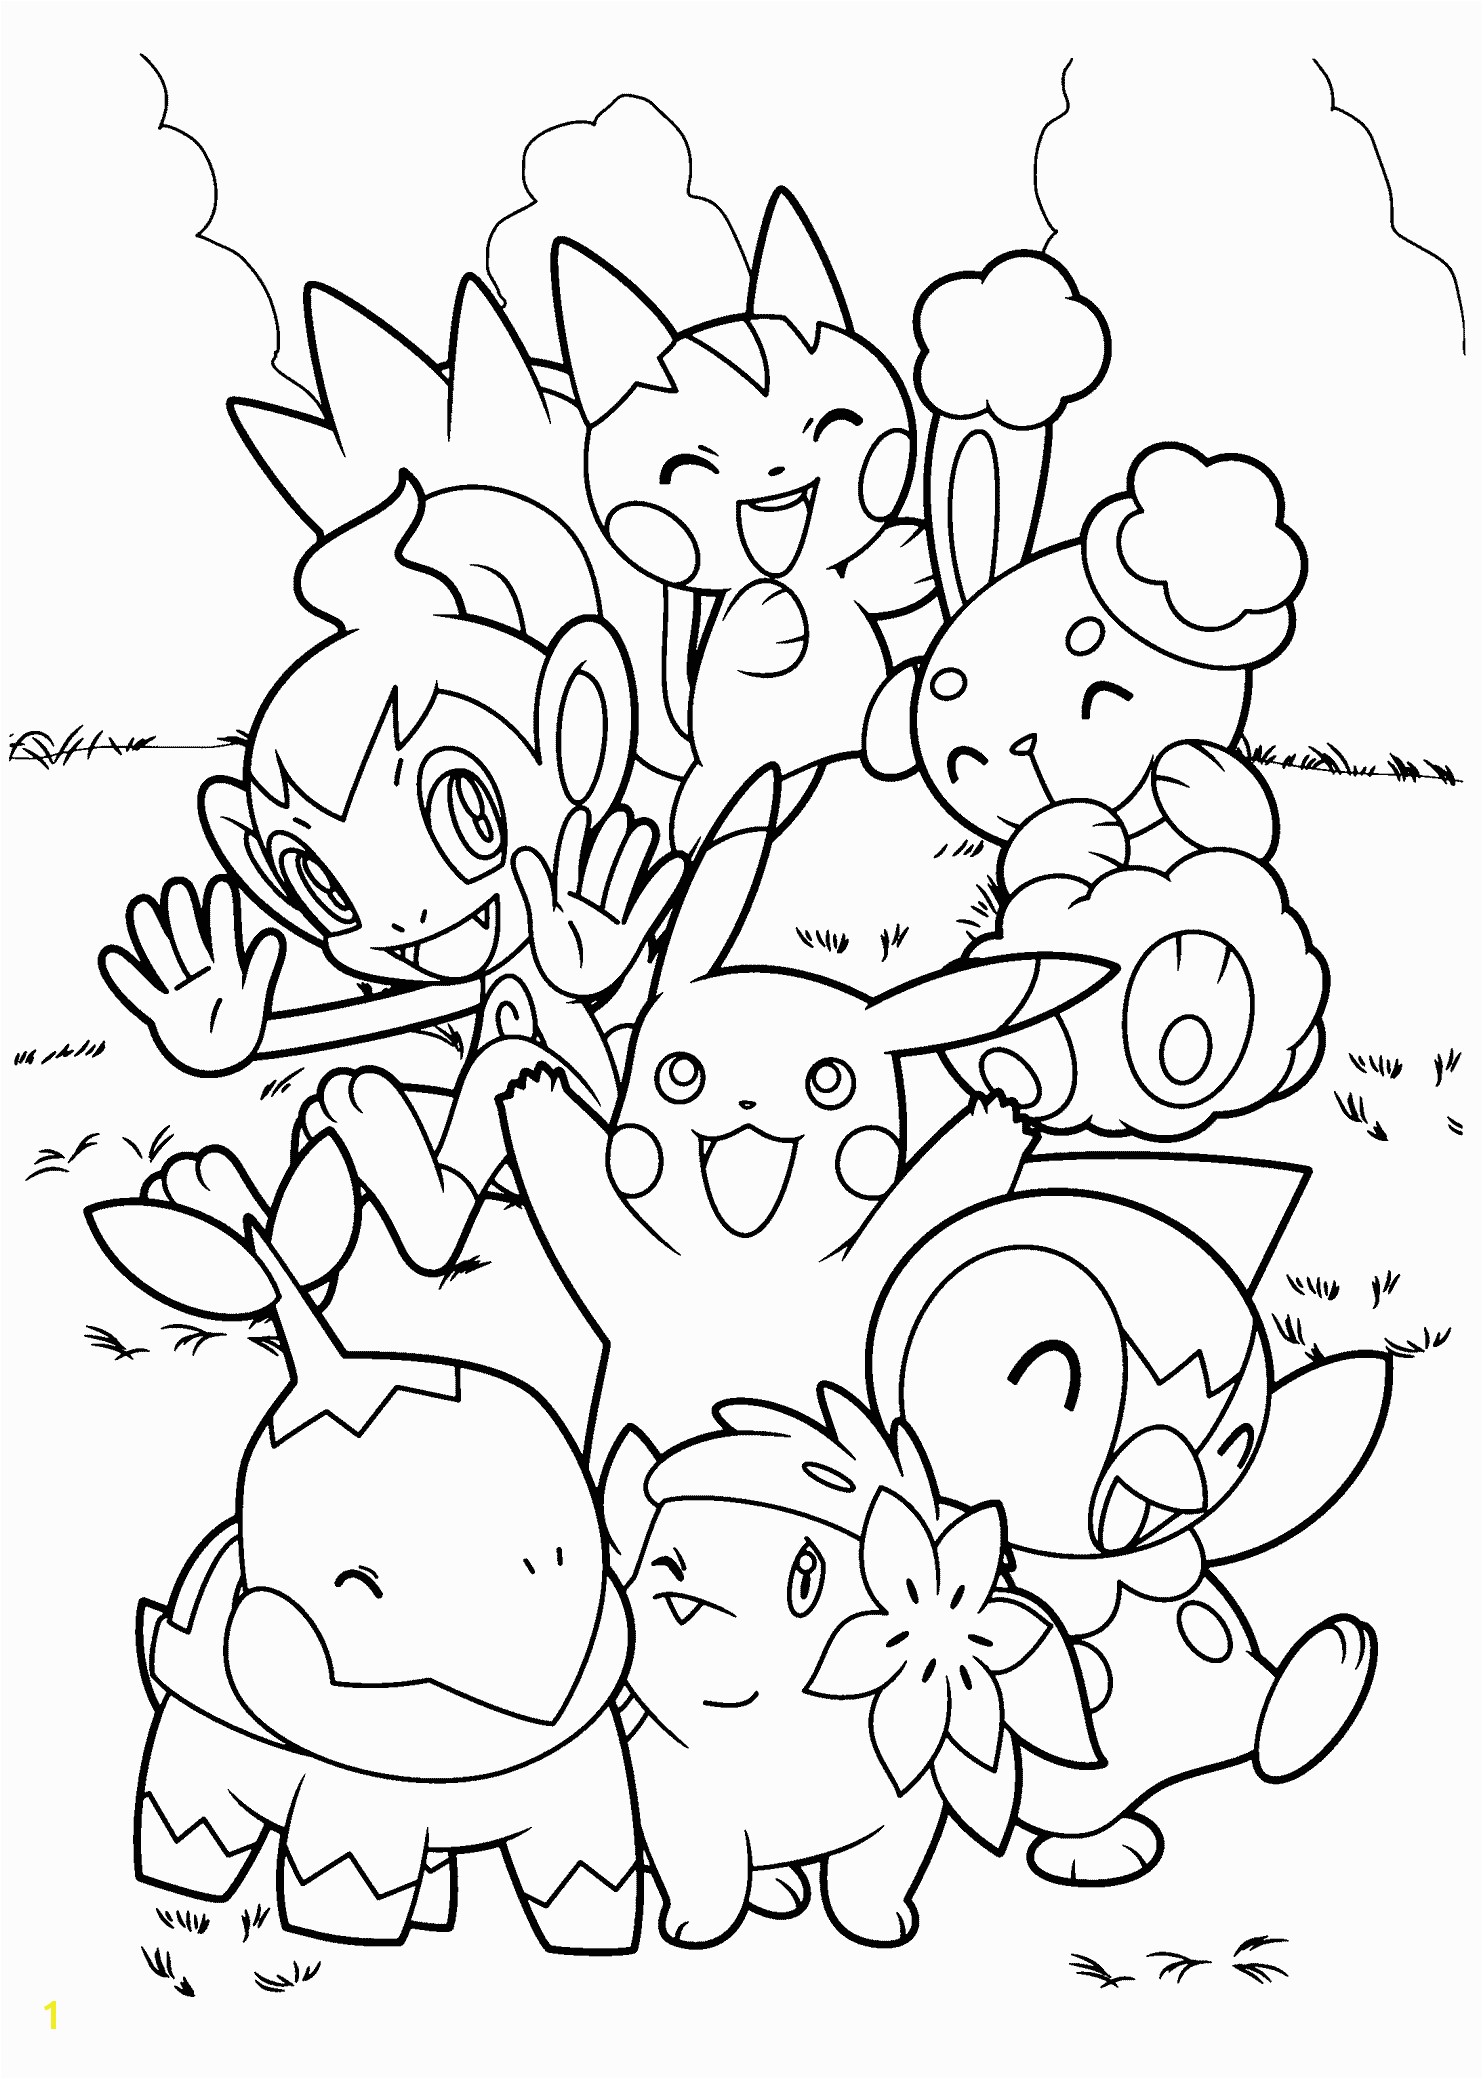 Pokemon Coloring Pages Printable Black and White top 75 Free Printable Pokemon Coloring Pages Line